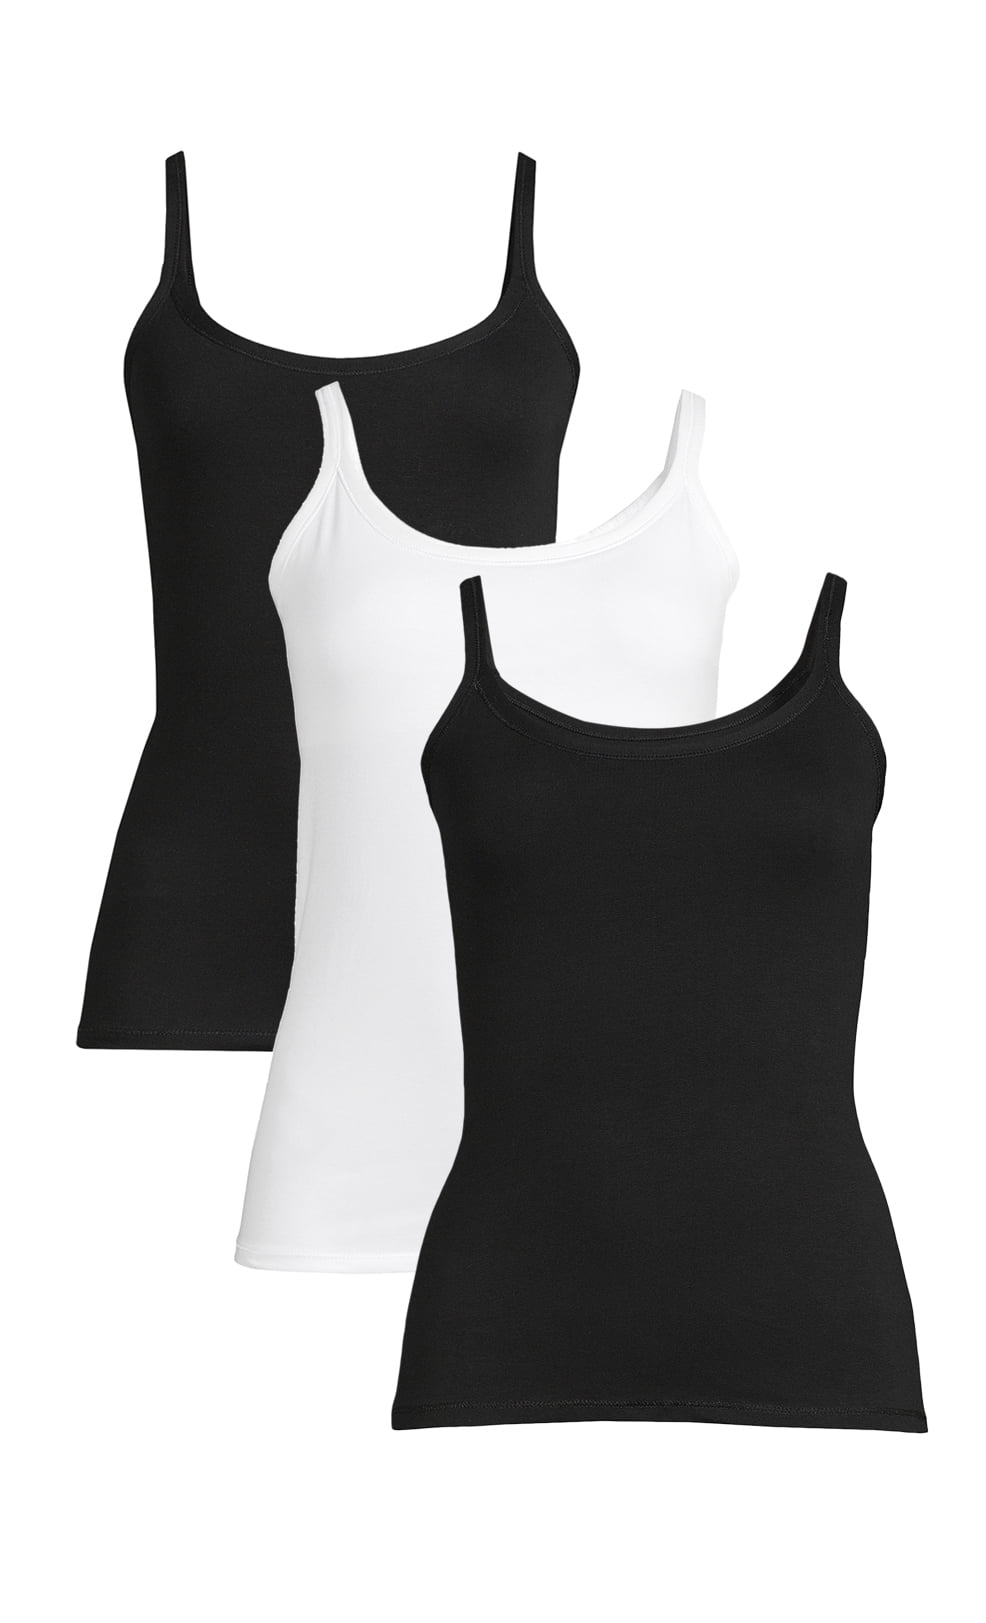 Cami With Built in Shelf Bra Adjustable Straps Layering Basic Tank Tops 3 Pack